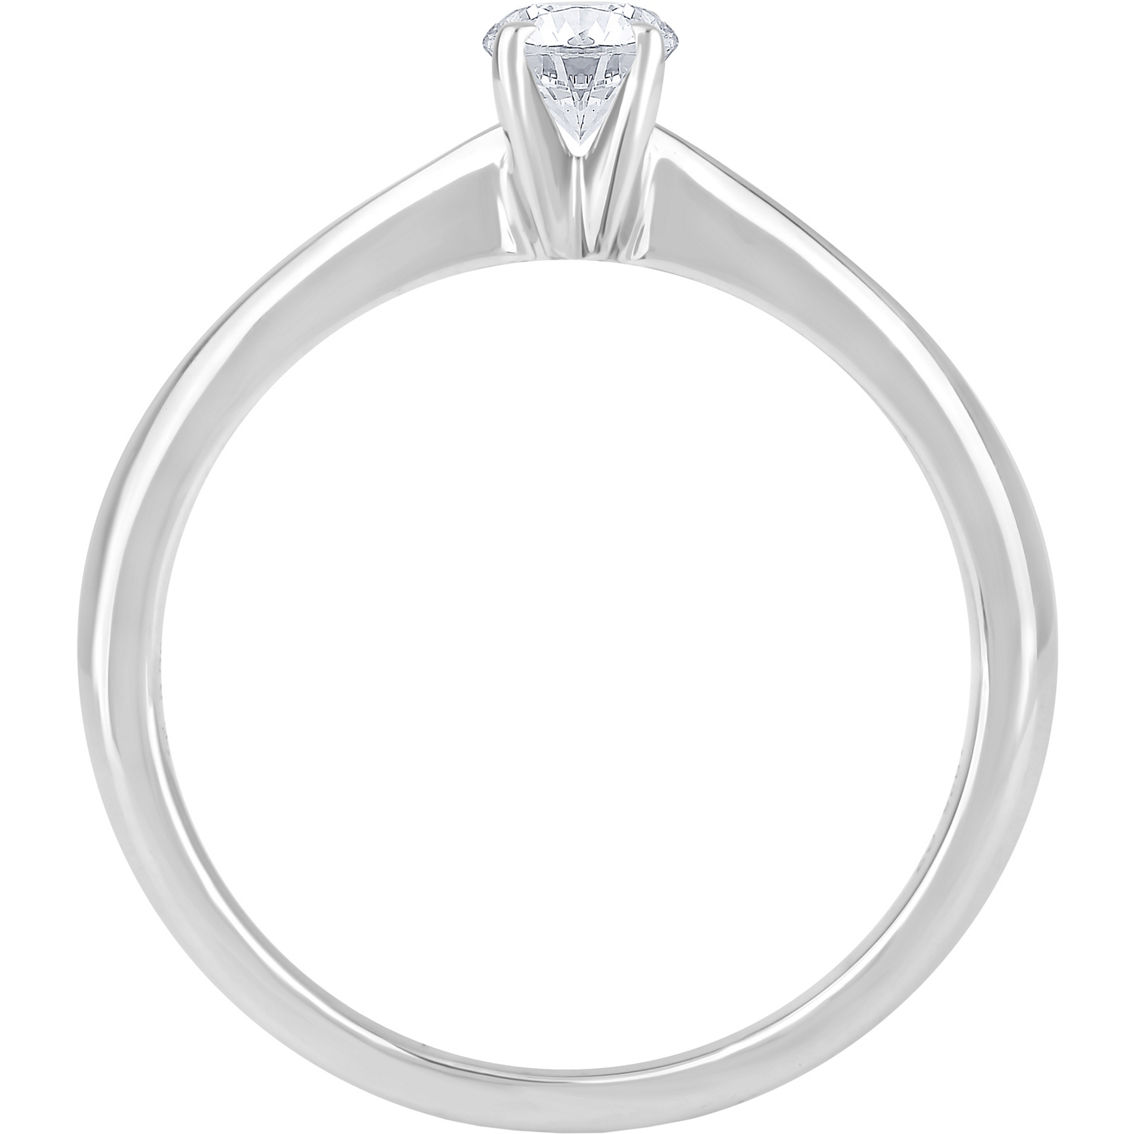 From the Heart 14K White Gold 1/4 ct. Lab Grown Round Diamond Solitaire Ring Size 9 - Image 2 of 2